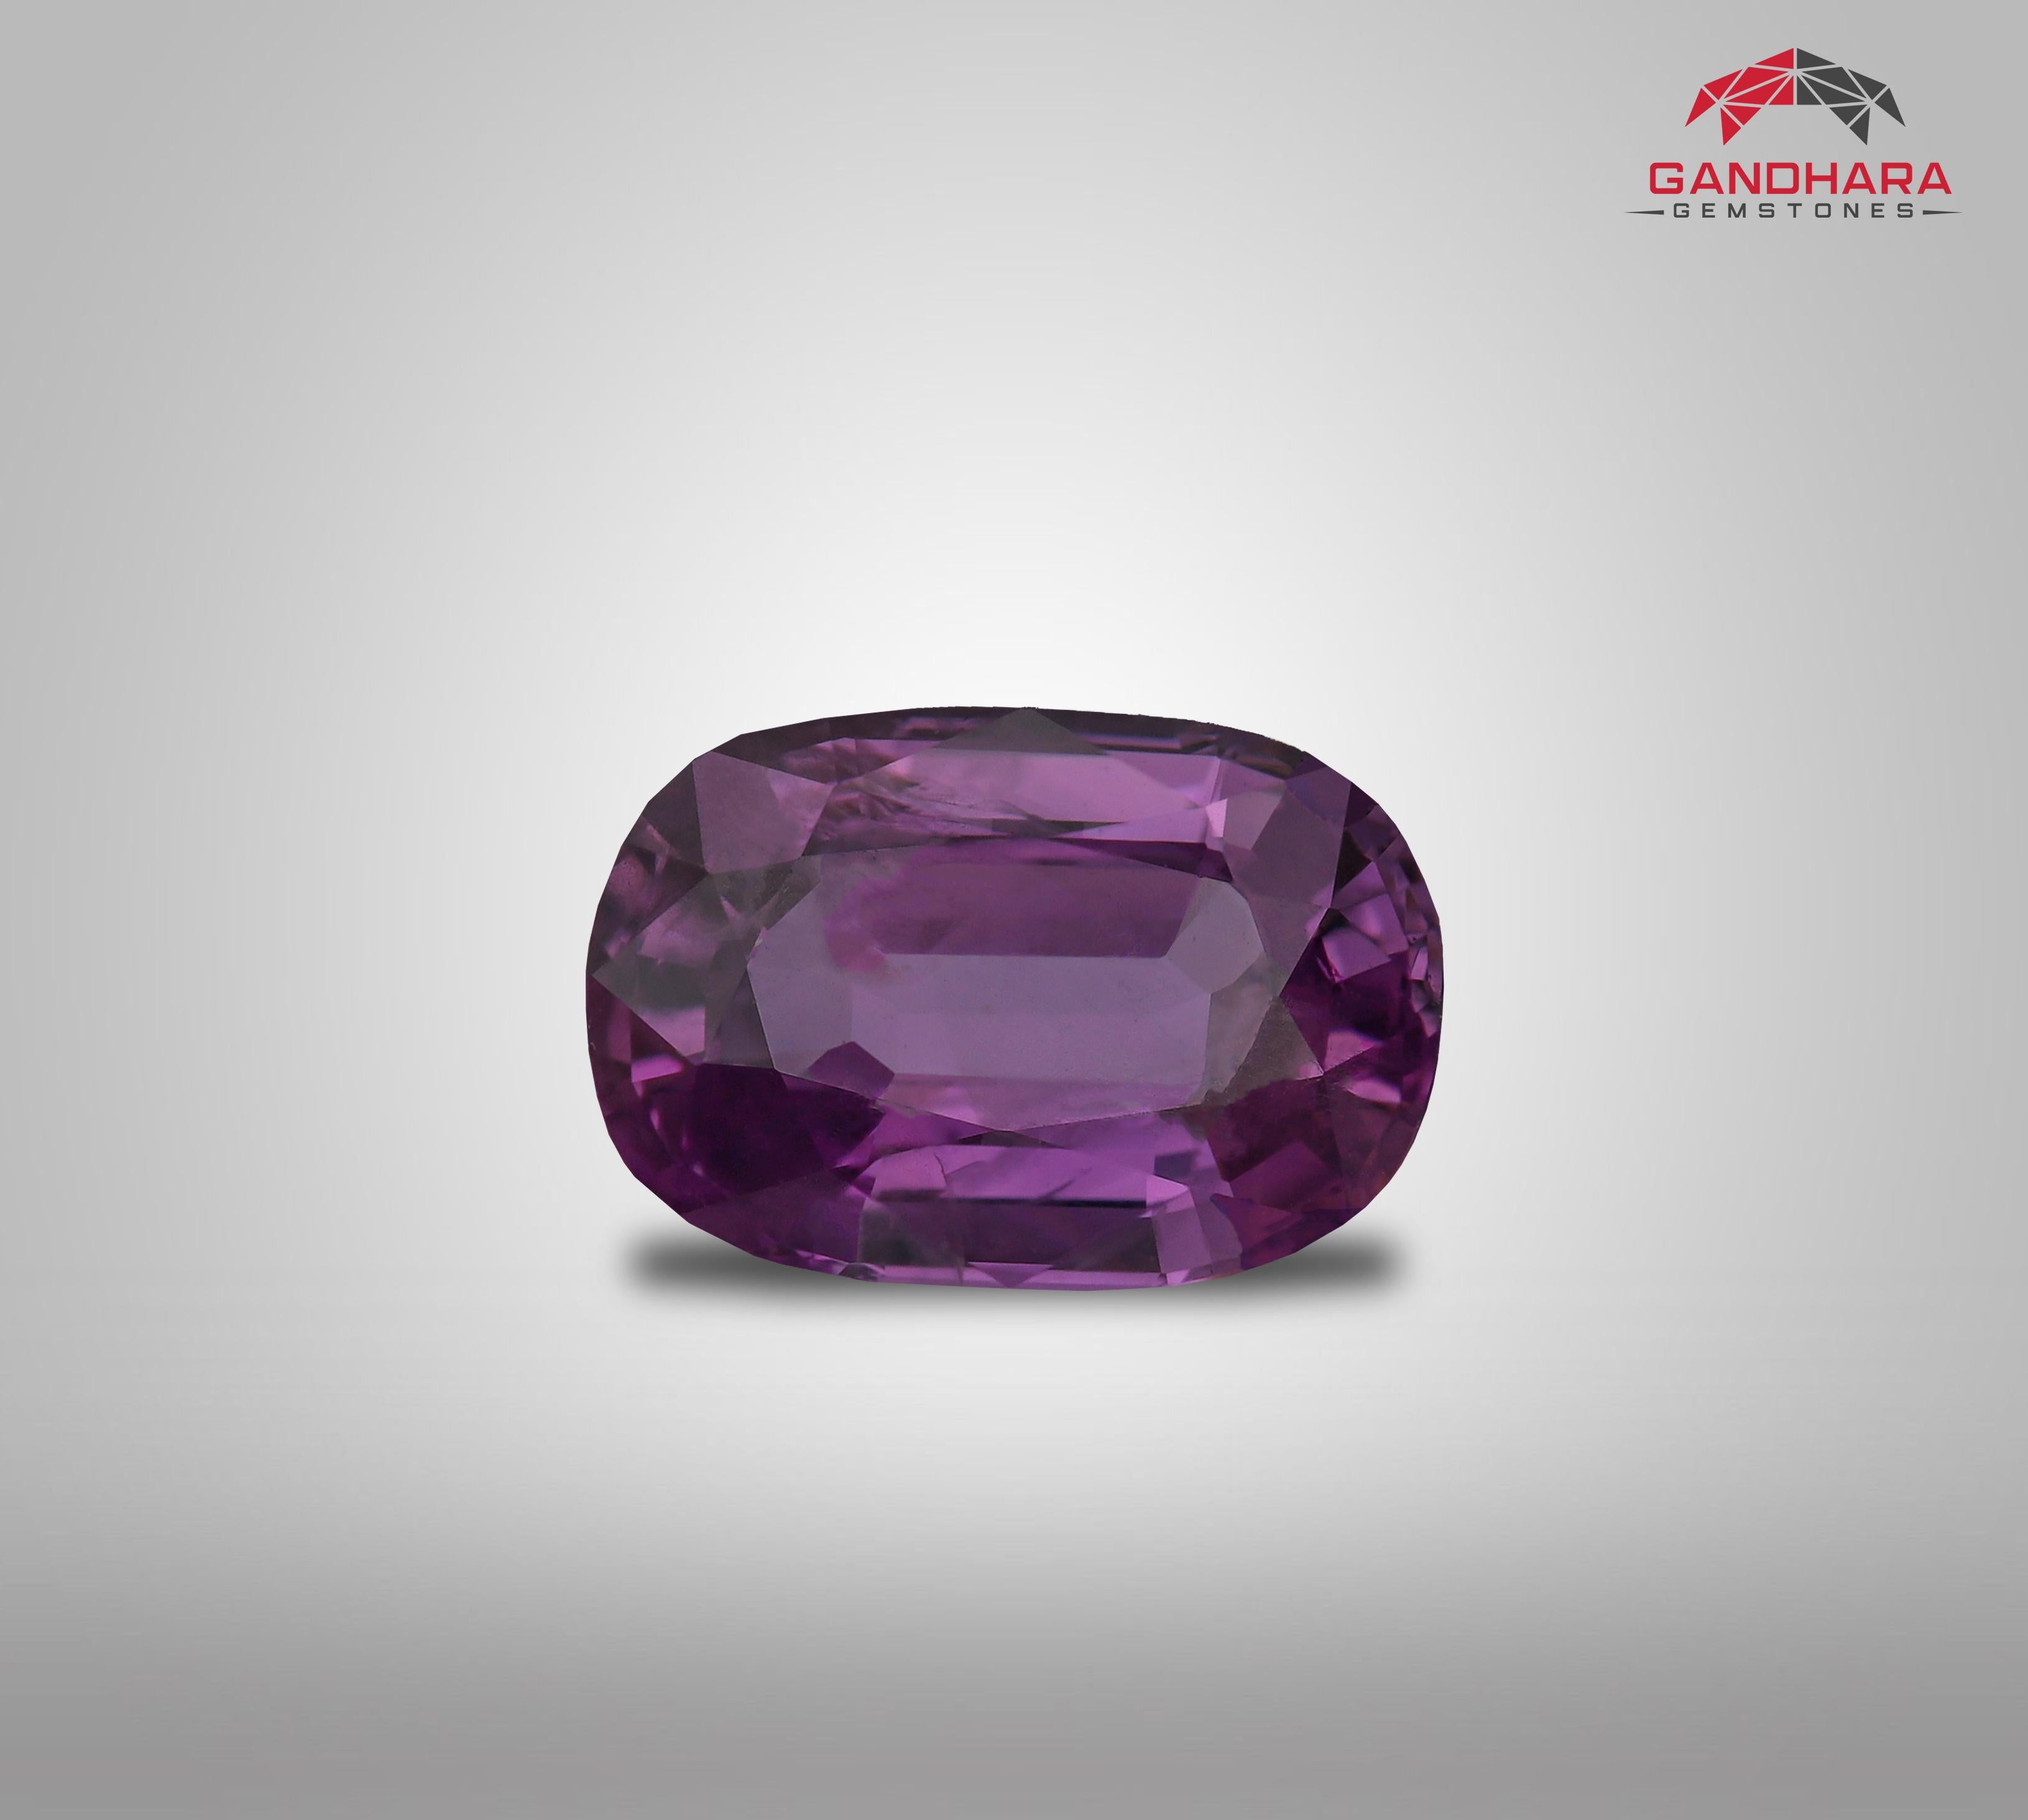 Natural Purple Loose Sapphire Stone, available for sale, natural high-quality loose gemstone, Brilliant Cut, 1.94 carats certified sapphire gemstone from Sri Lanka.

Twilight Blue Sapphire Stone Jewelry Information:
GEMSTONE TYPE	Natural Purple